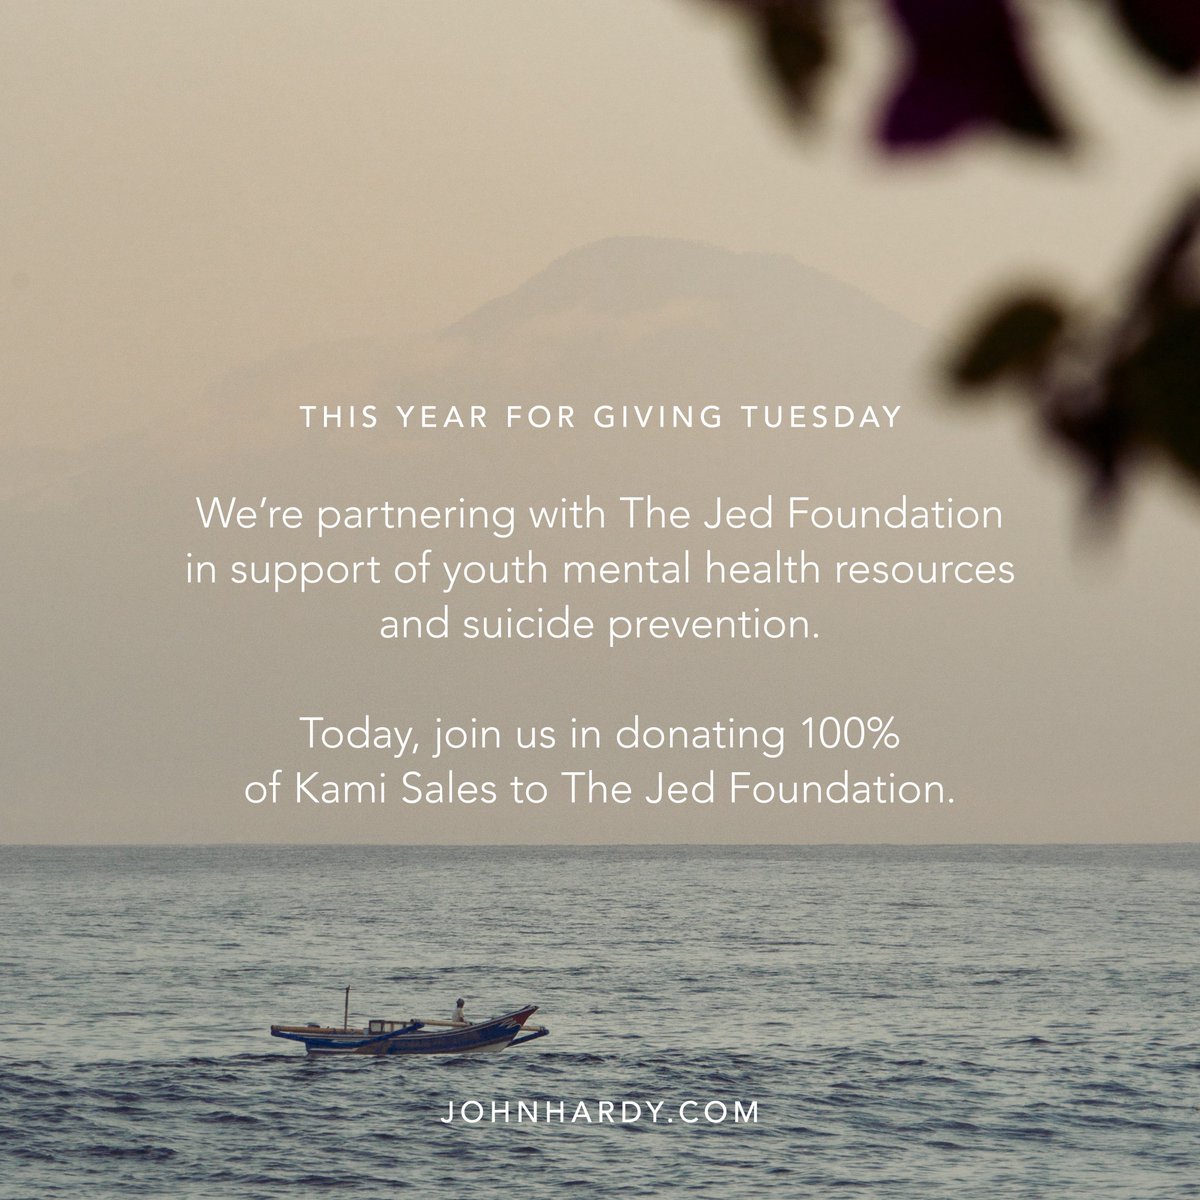 Today, join us in donating 100% of Kami Sales to @jedfoundation, in support of youth mental health resources and suicide prevention. bit.ly/GivingTuesday2… #MentalHealthMatters #JedPartner